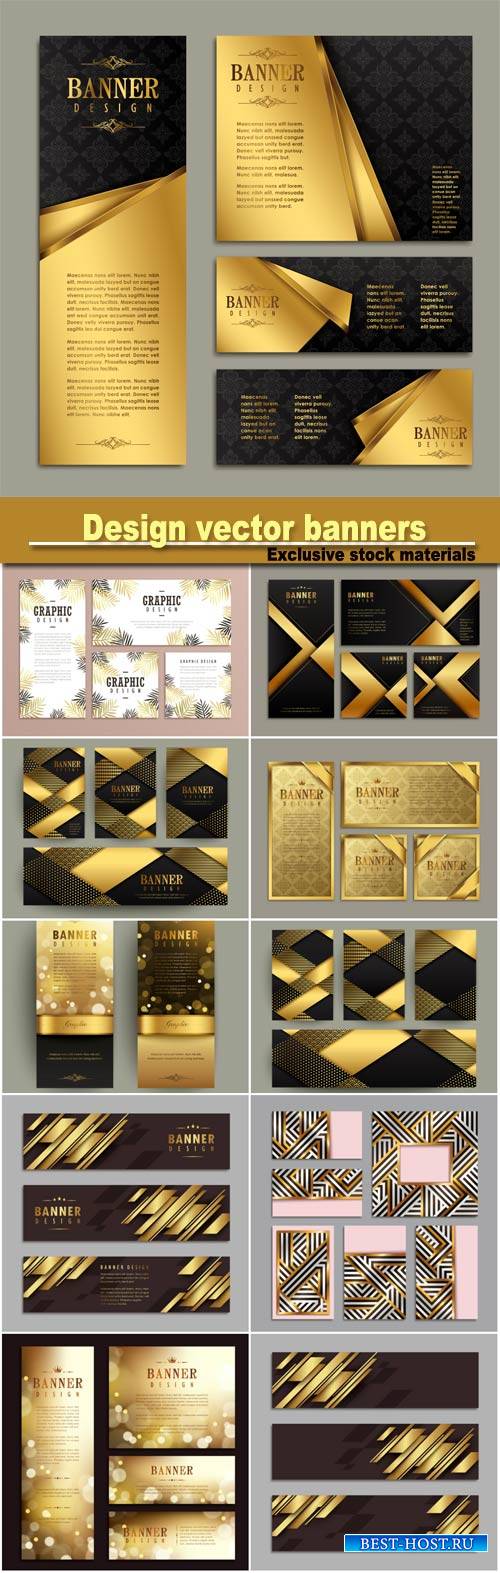 Design vector banners with gold